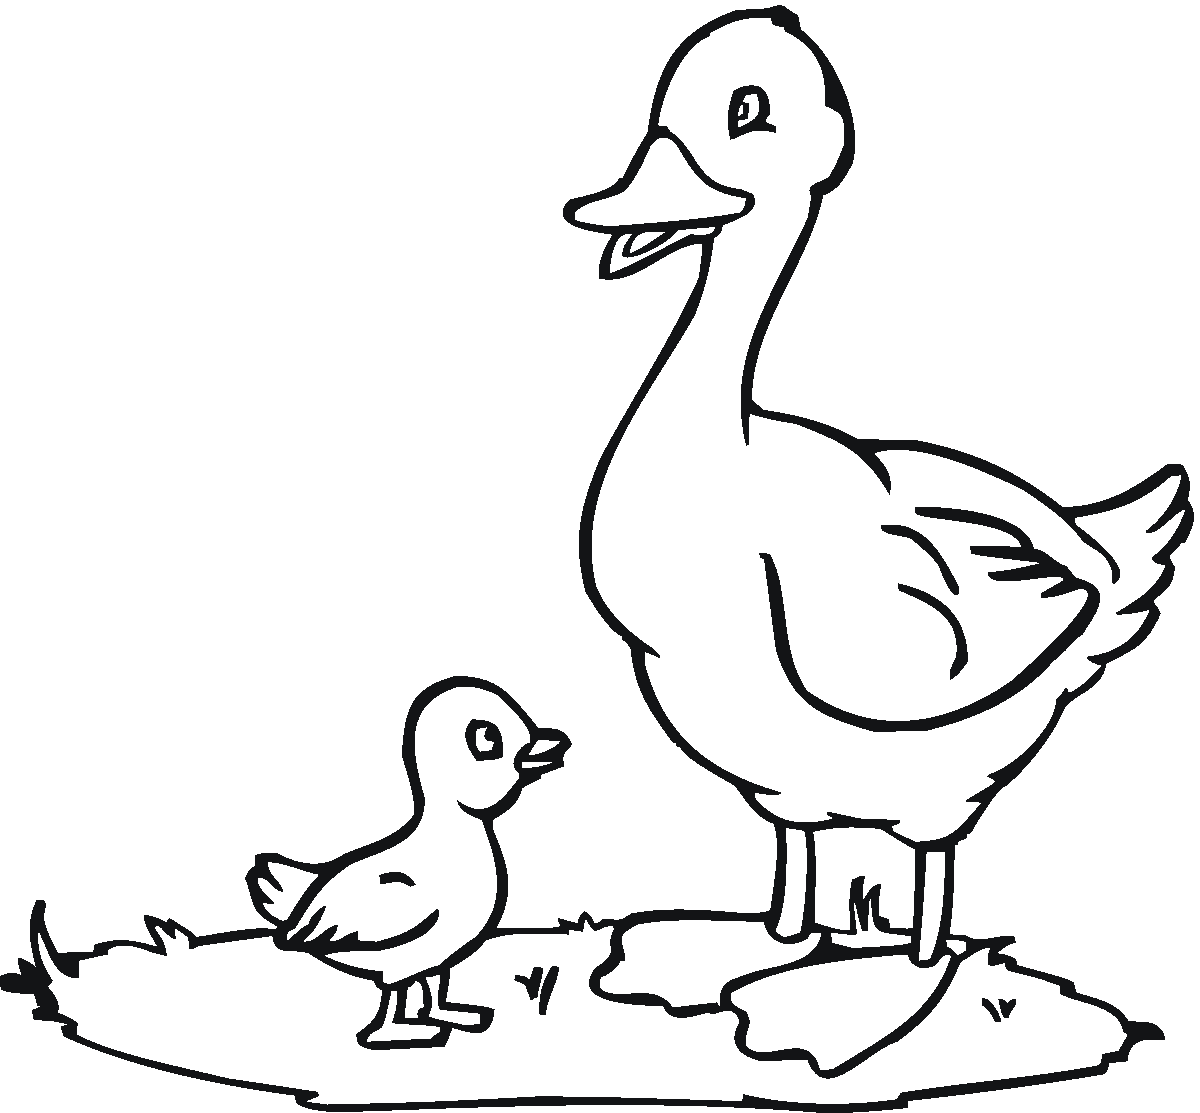 Duck Outline Printable   Clipart Best